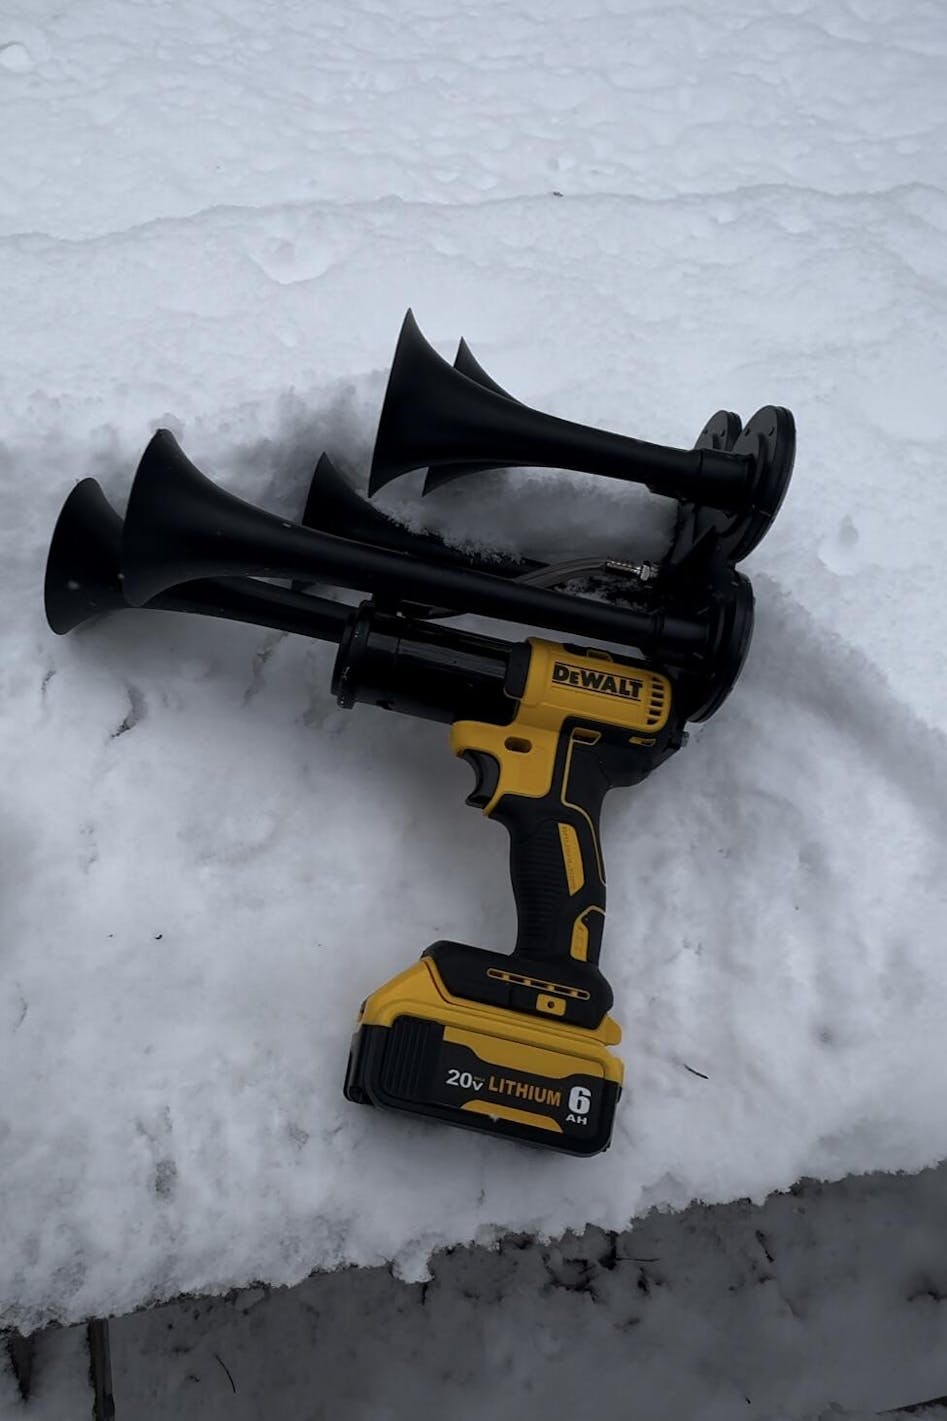 Bauer Impact Drill Train Horn with Remote Control - BossHorn: Made